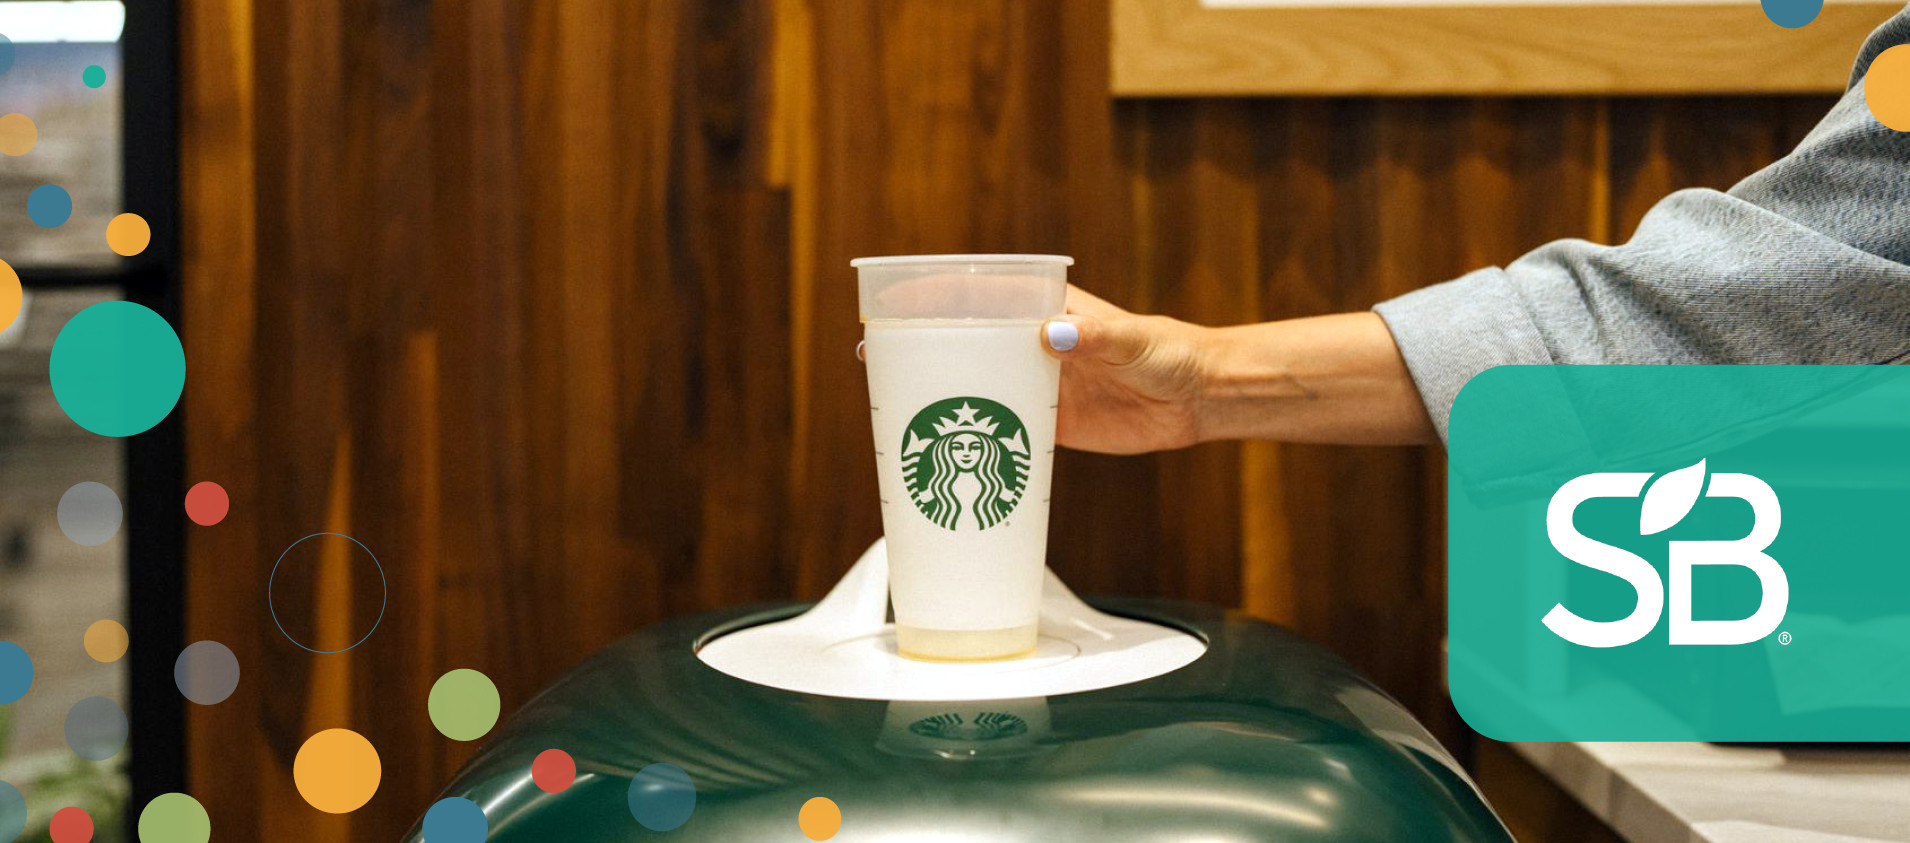 Starbucks moving away from single-use coffee cups, introducing a